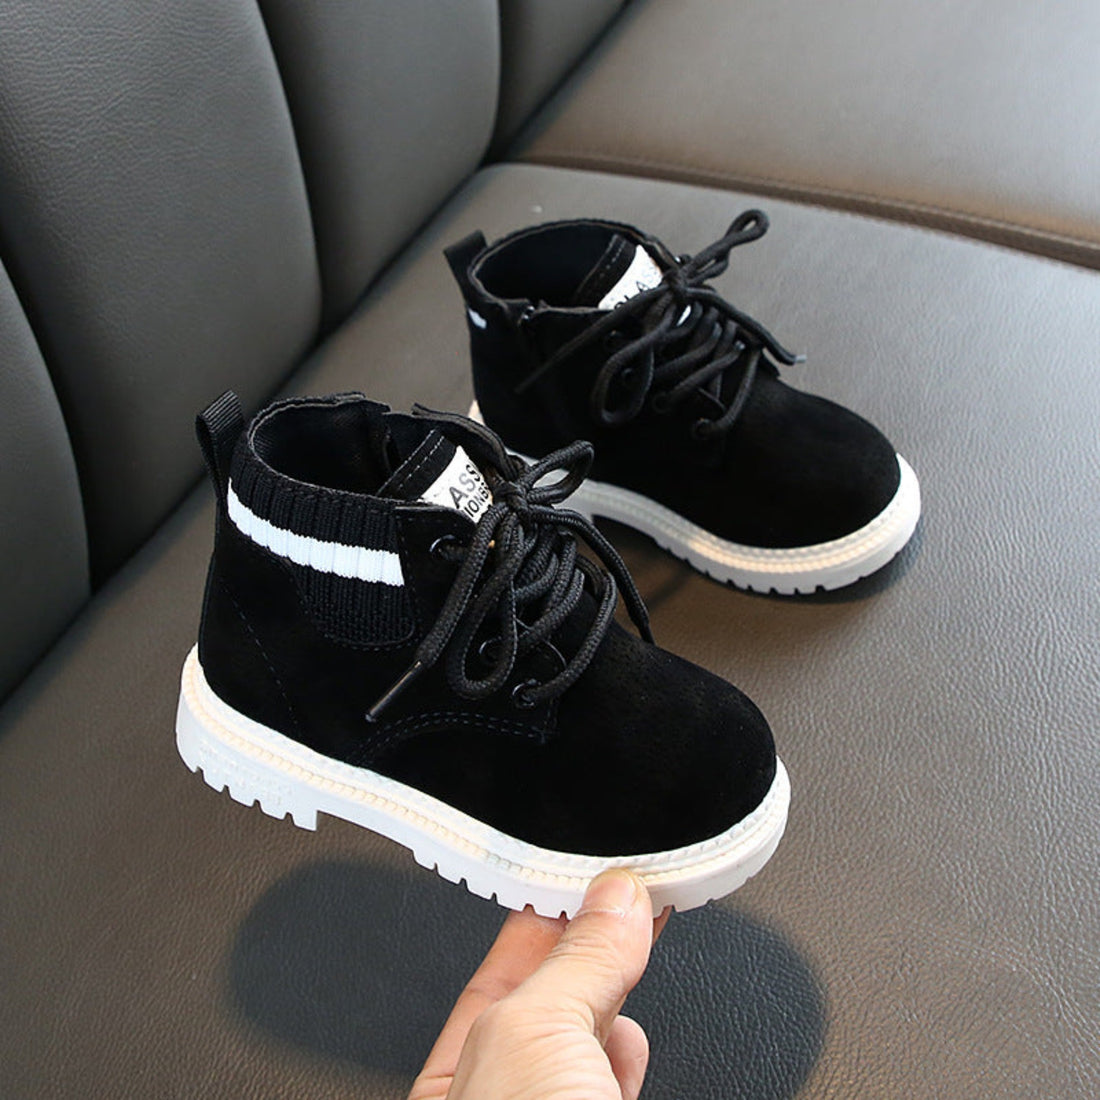 Breathable toddler shoes in black